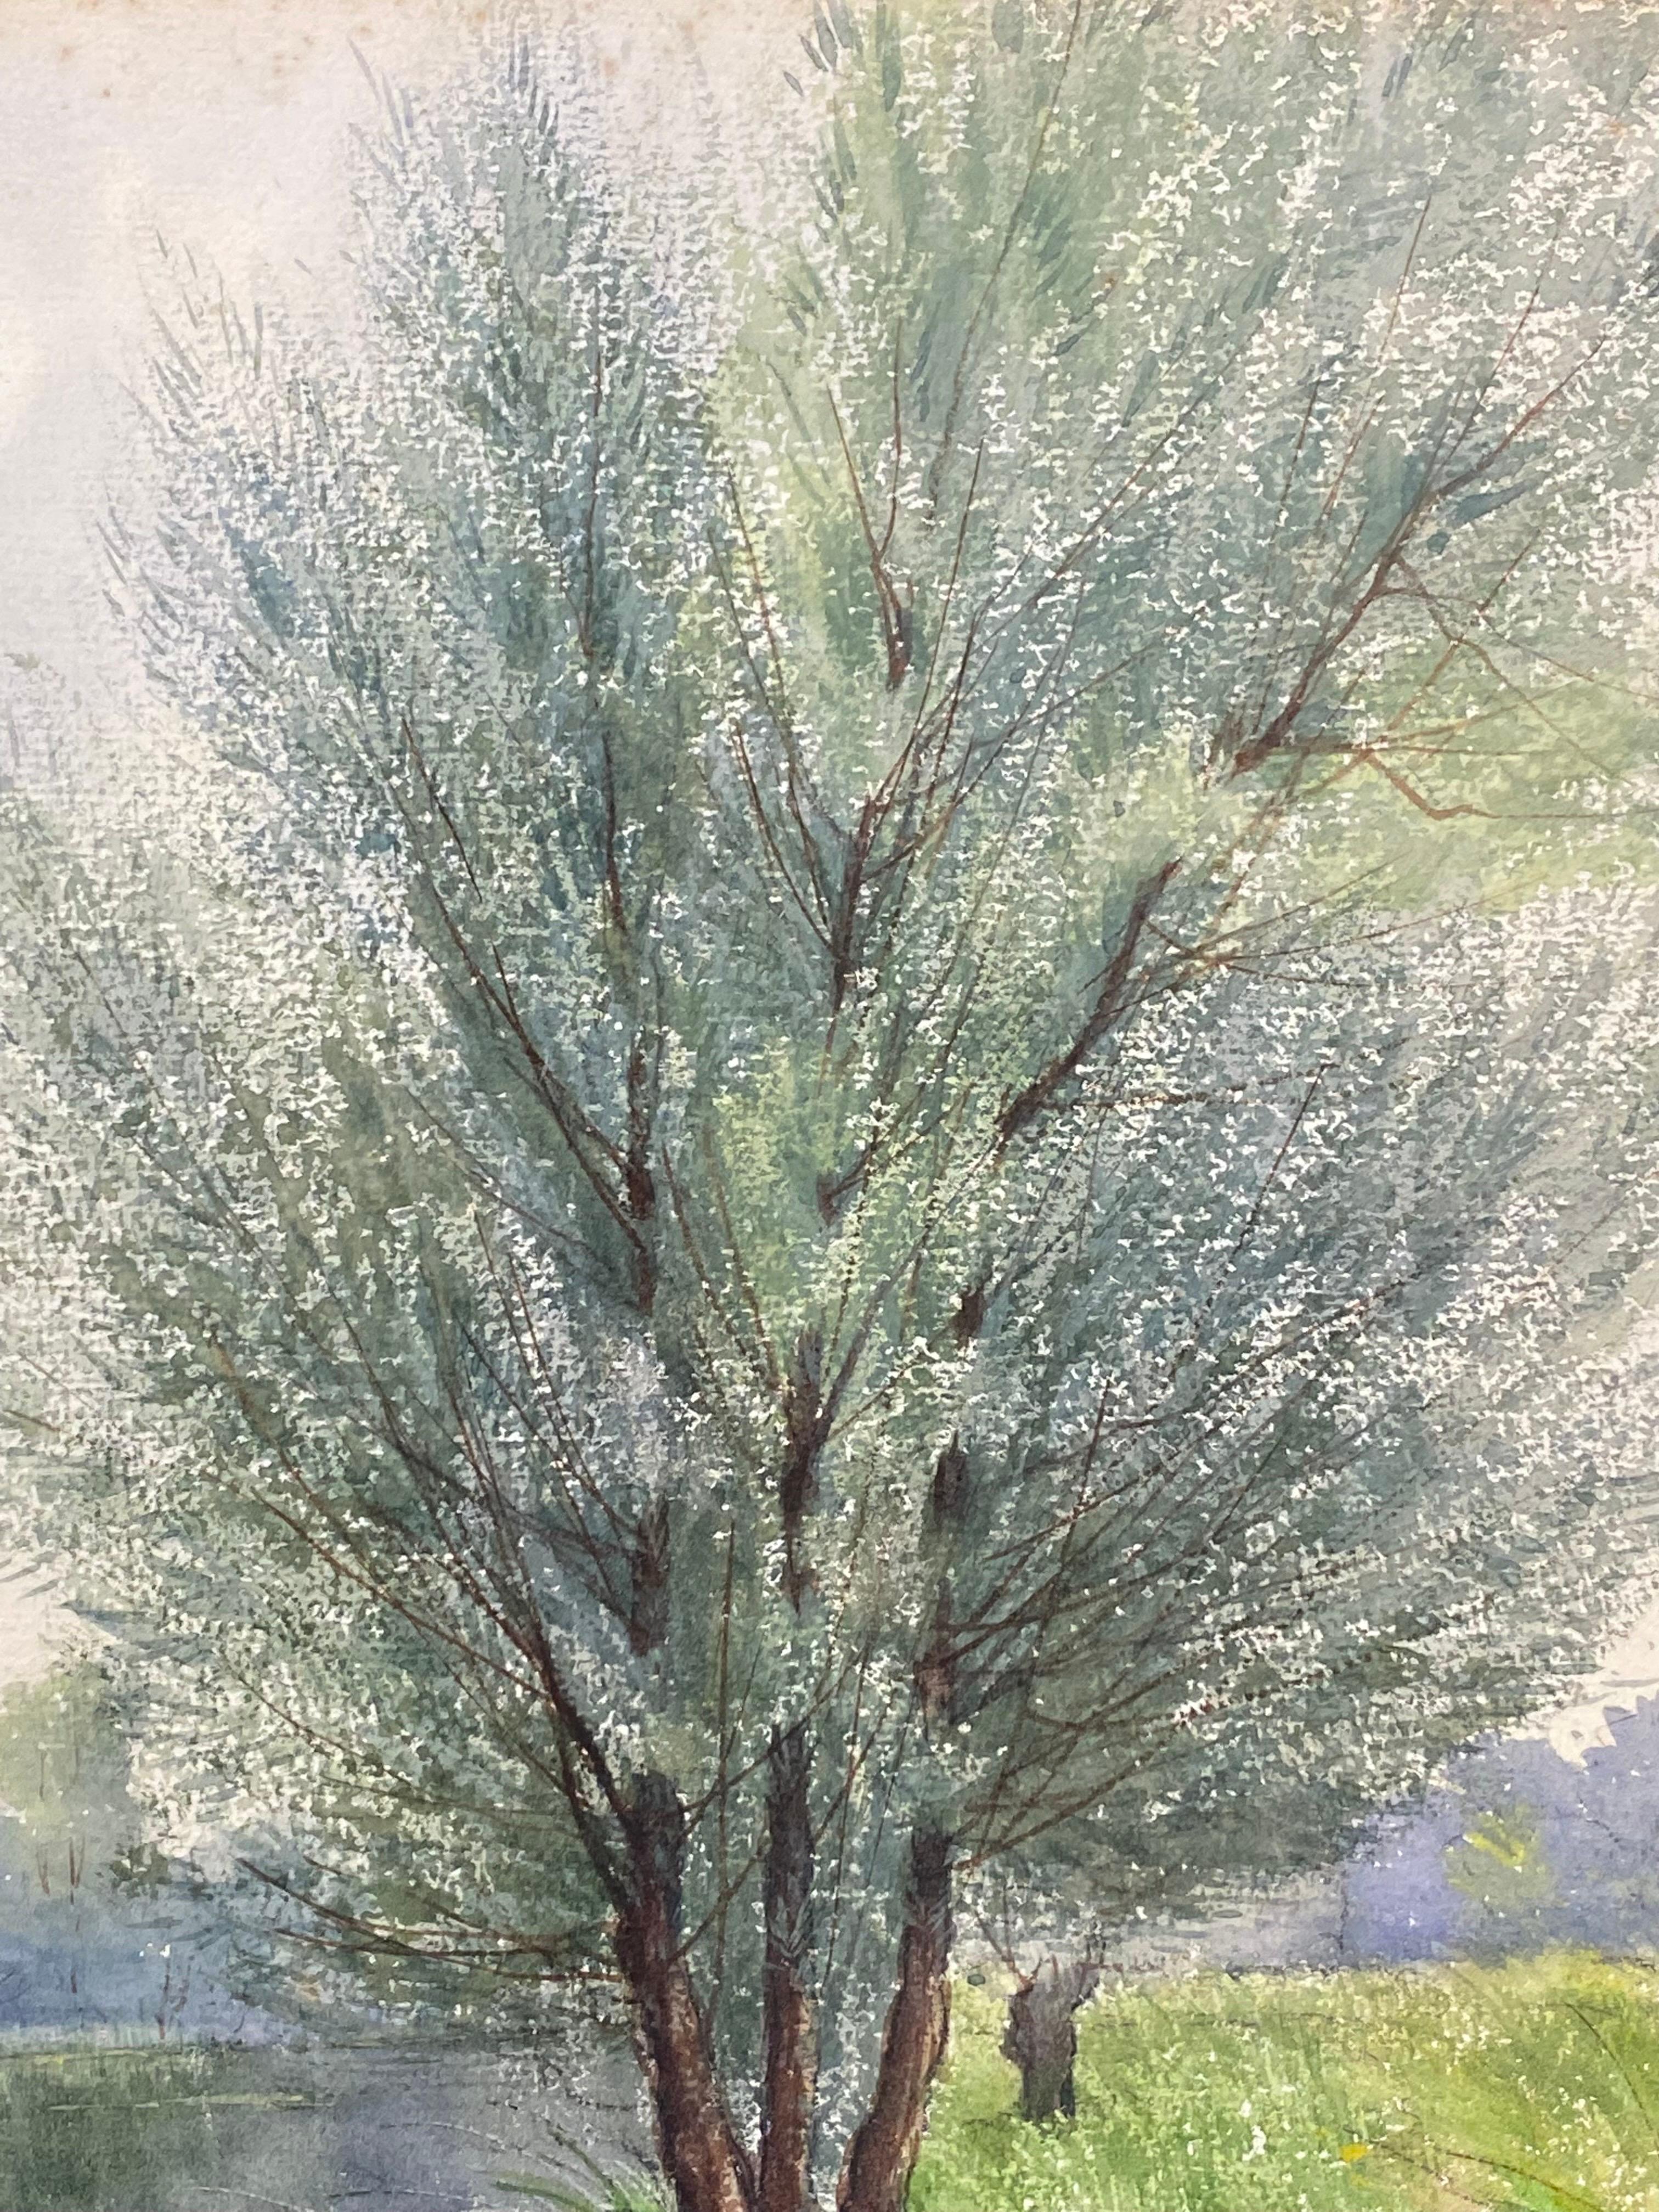 Artist/ School: French School,  early 20th century

Title: Willows by the River

Medium: watercolour painting on card, unframed

painting: 15 x 10.5 inches

Provenance: private collection, France

Condition: The painting is in overall very good and